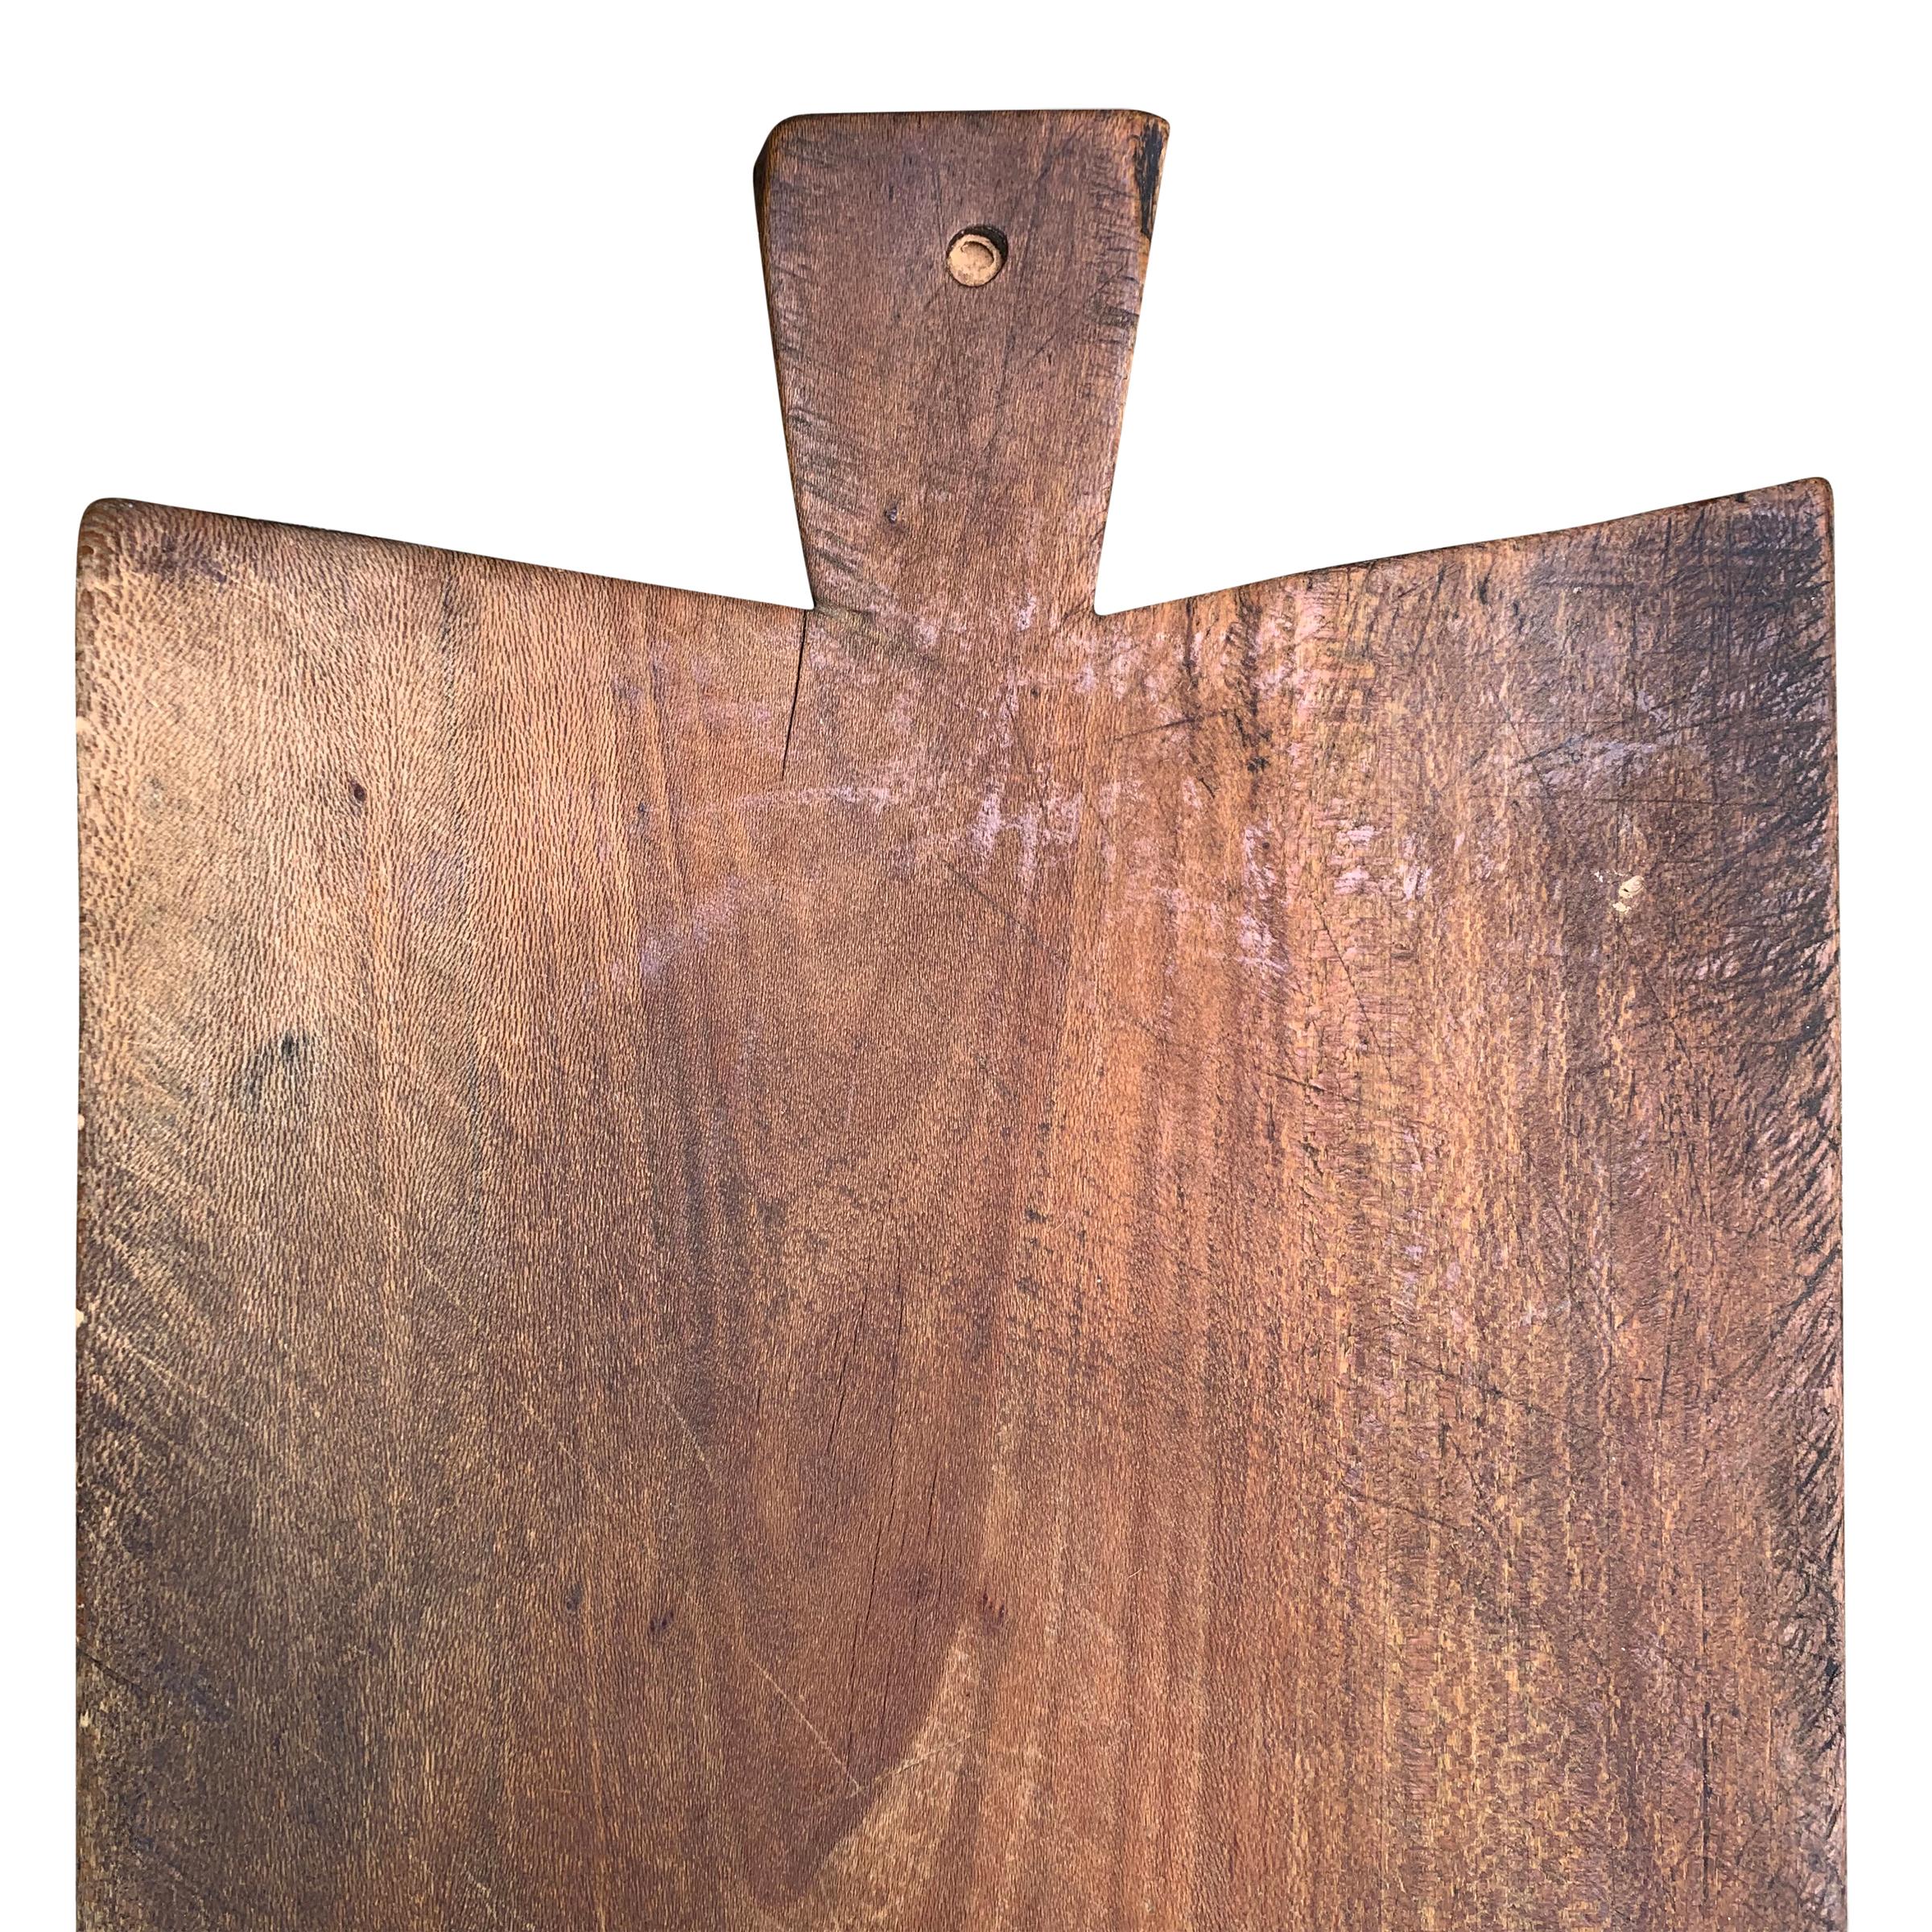 Wood Early 20th Century French Cutting Board